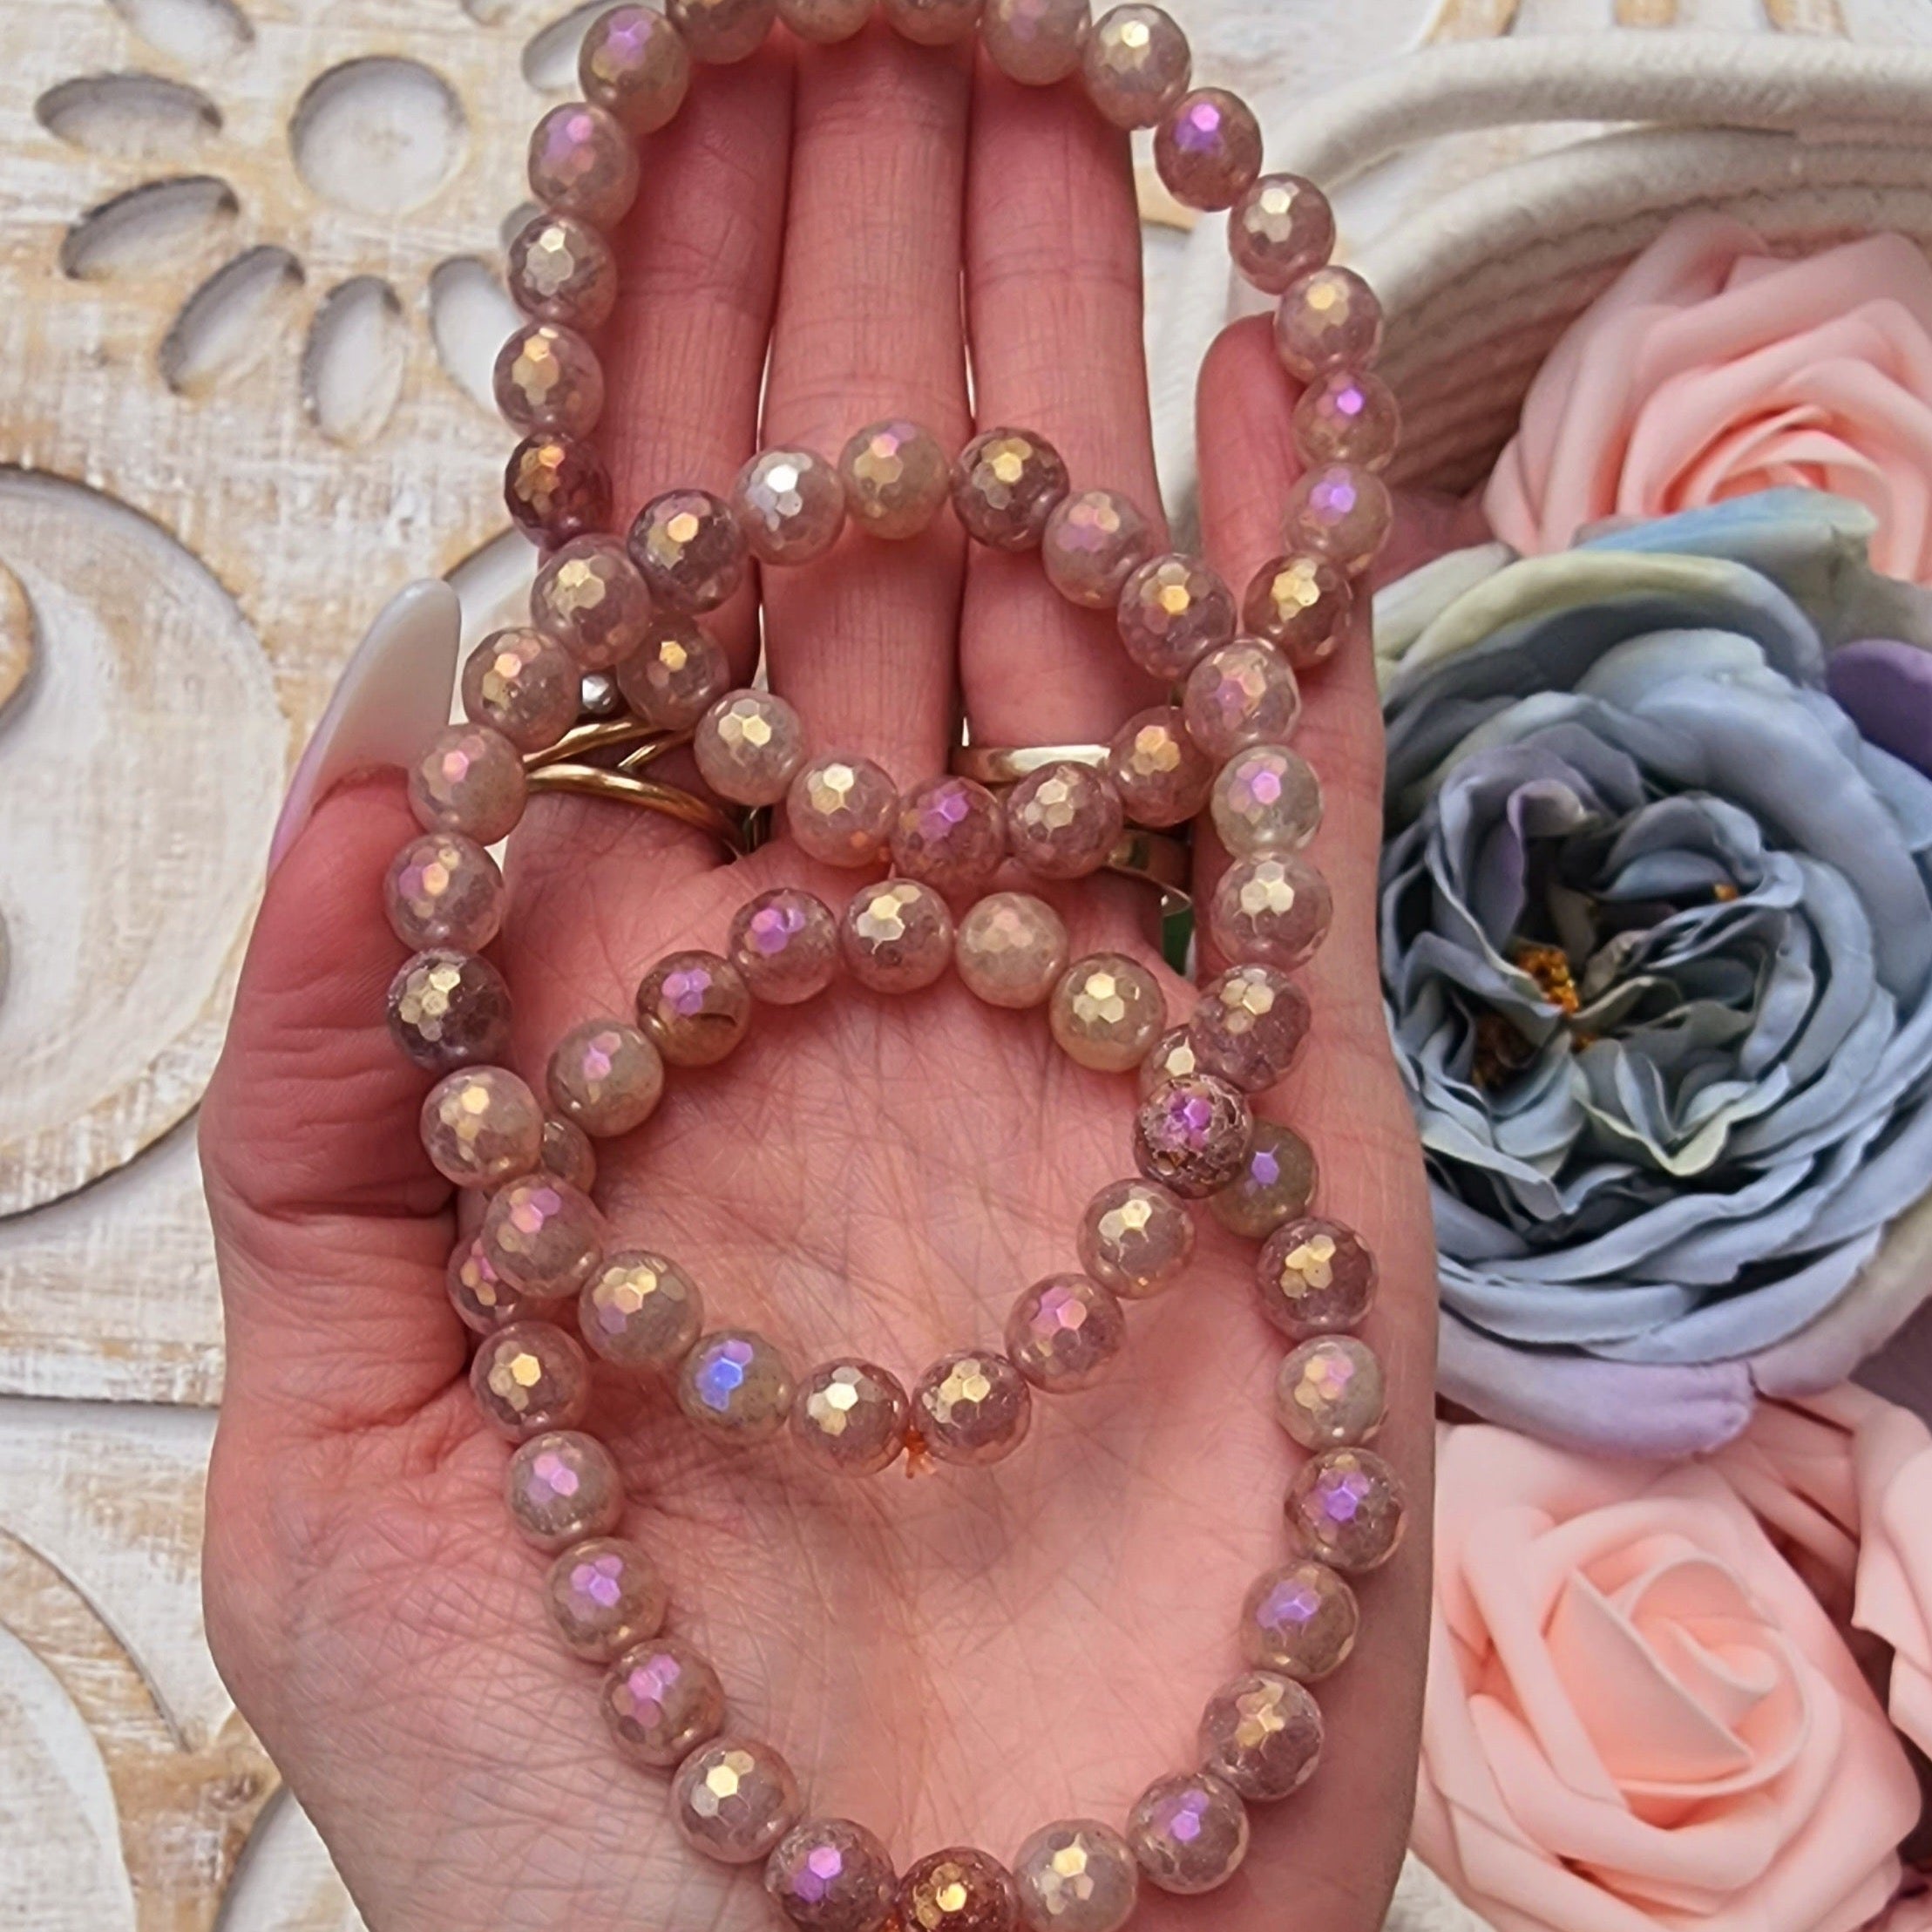 Aura Tanzberry Quartz Faceted Bracelet for Joy and Opening Your Heart to the Pleasures of Love